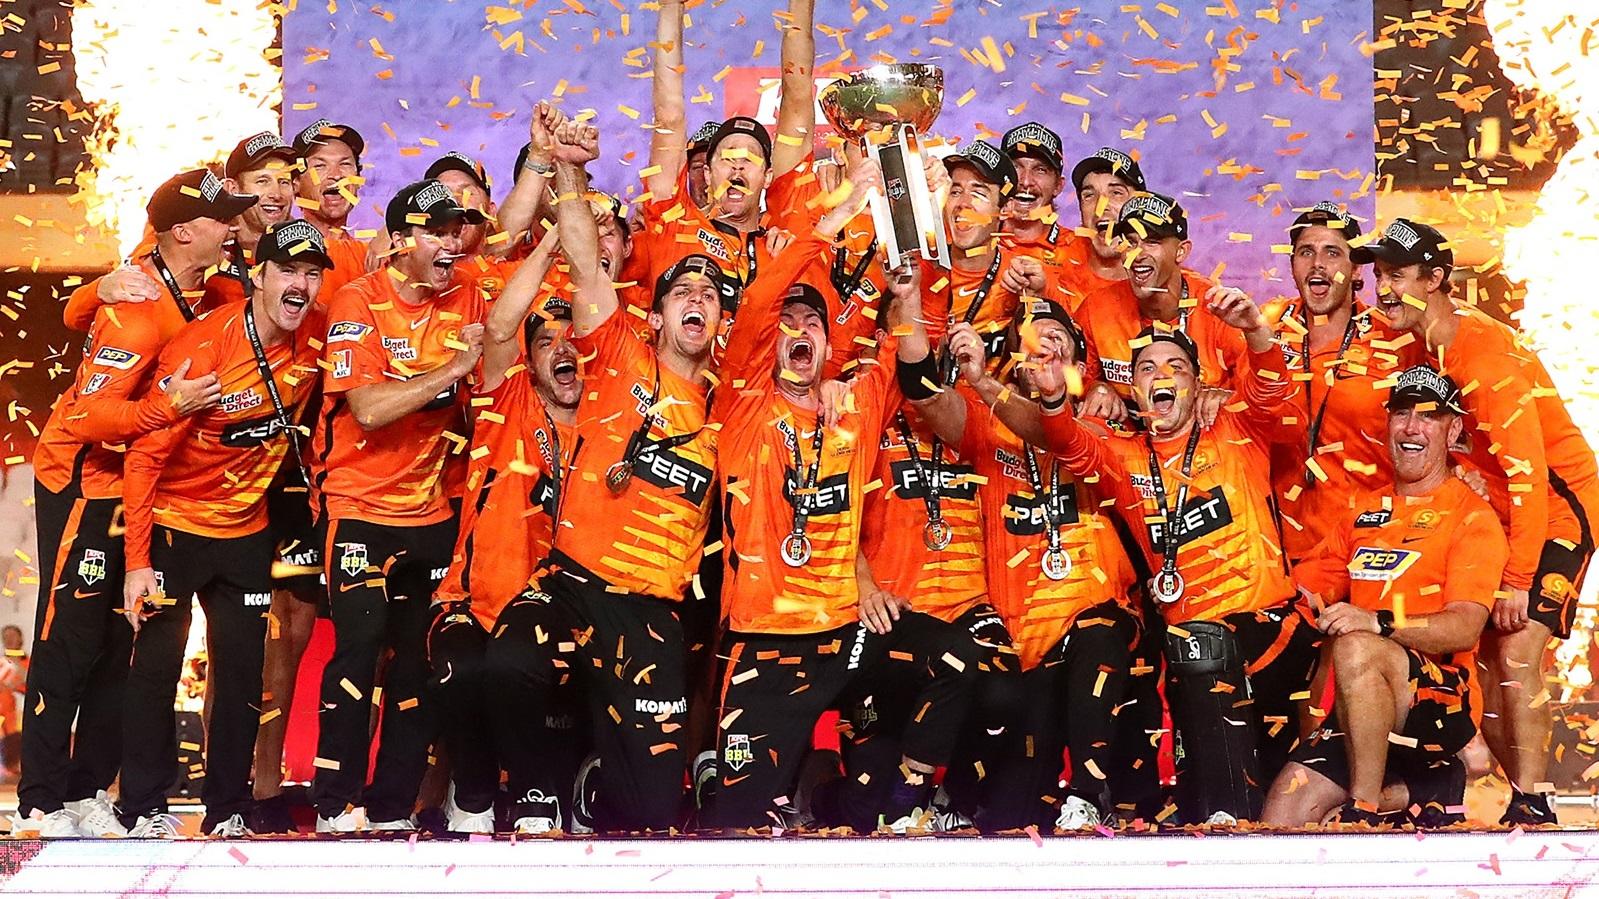 BBL 2022-23 Live Streaming Details Where to Watch Big Bash League 2022-23 LIVE on TV? Channels, Teams, Squads, Fixtures, Formats, Icon players and All you need to know